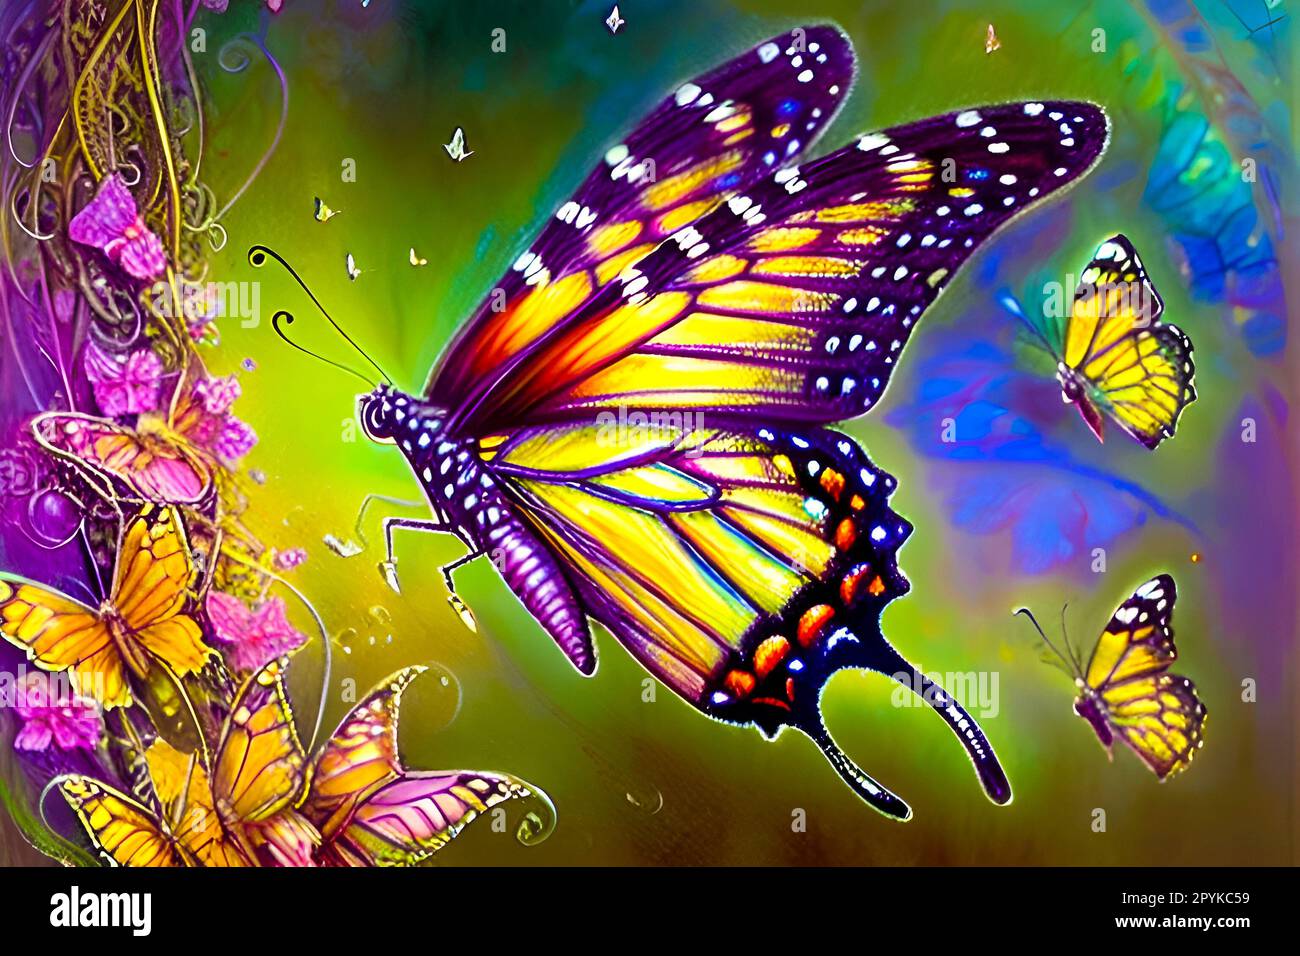 https://c8.alamy.com/comp/2PYKC59/butterfly-and-butterfly-wings-on-colorful-background-digital-painting-2PYKC59.jpg